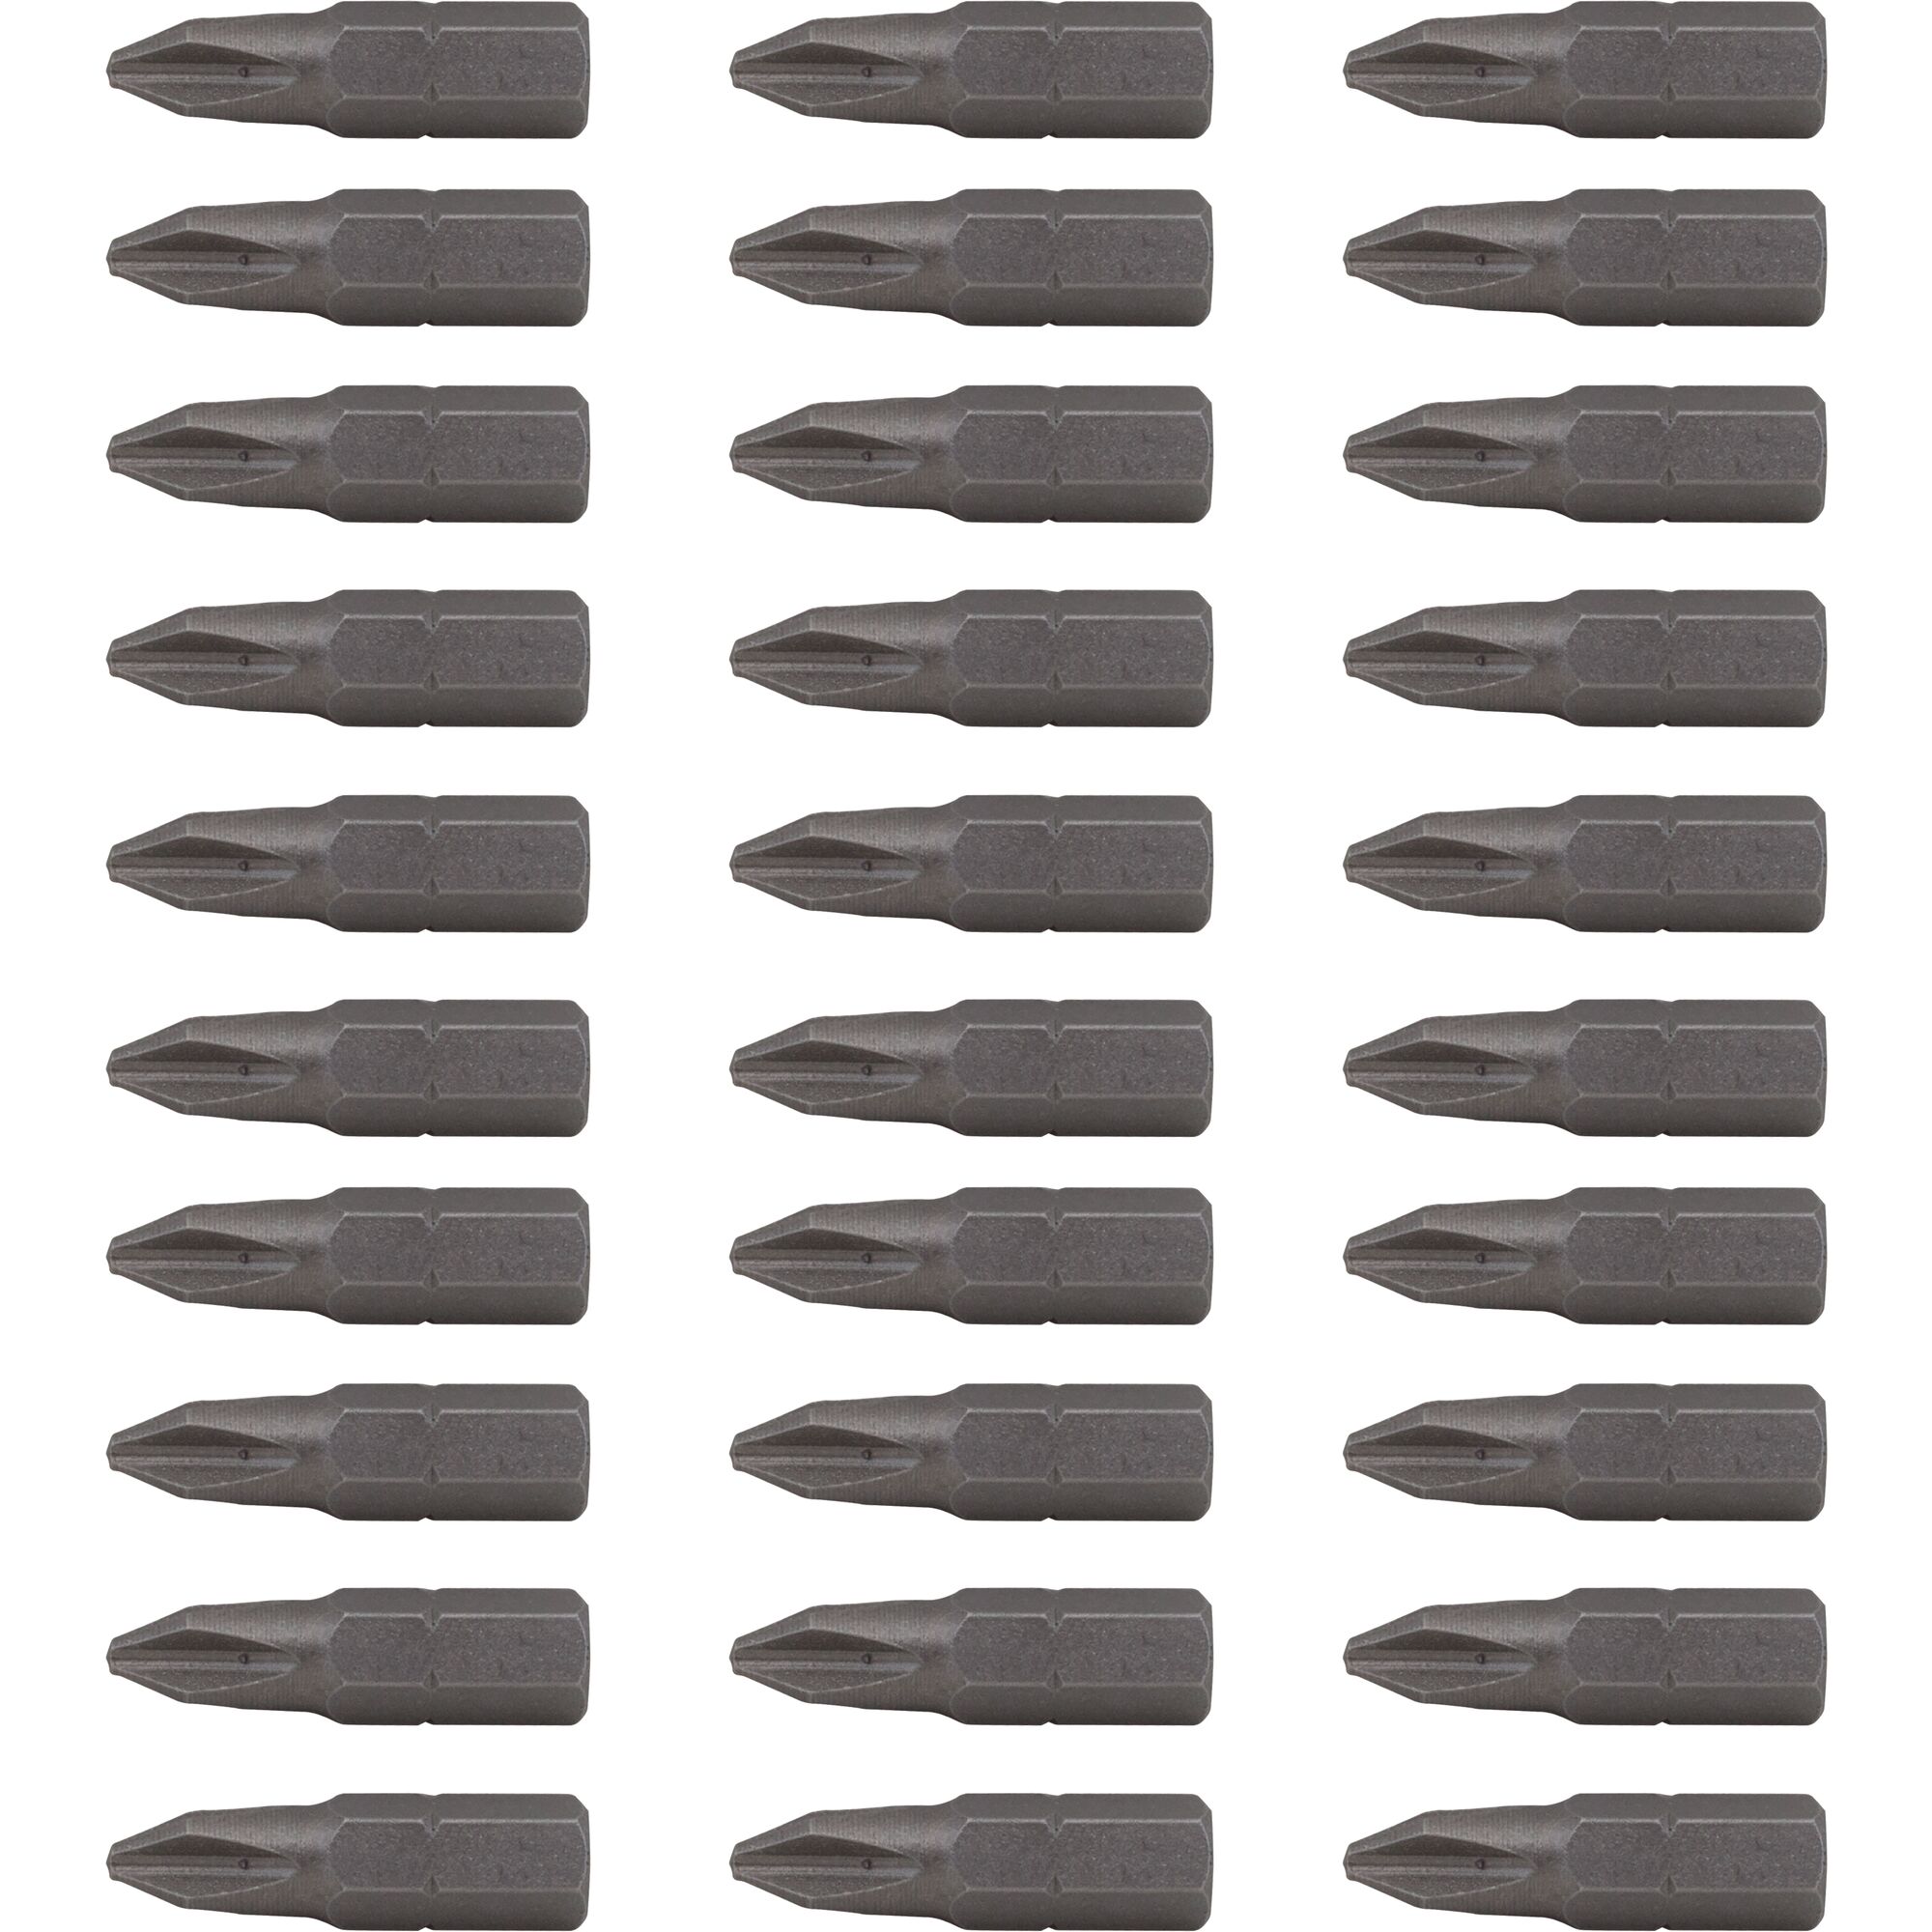 View of CRAFTSMAN Screwdrivers: Bits on white background